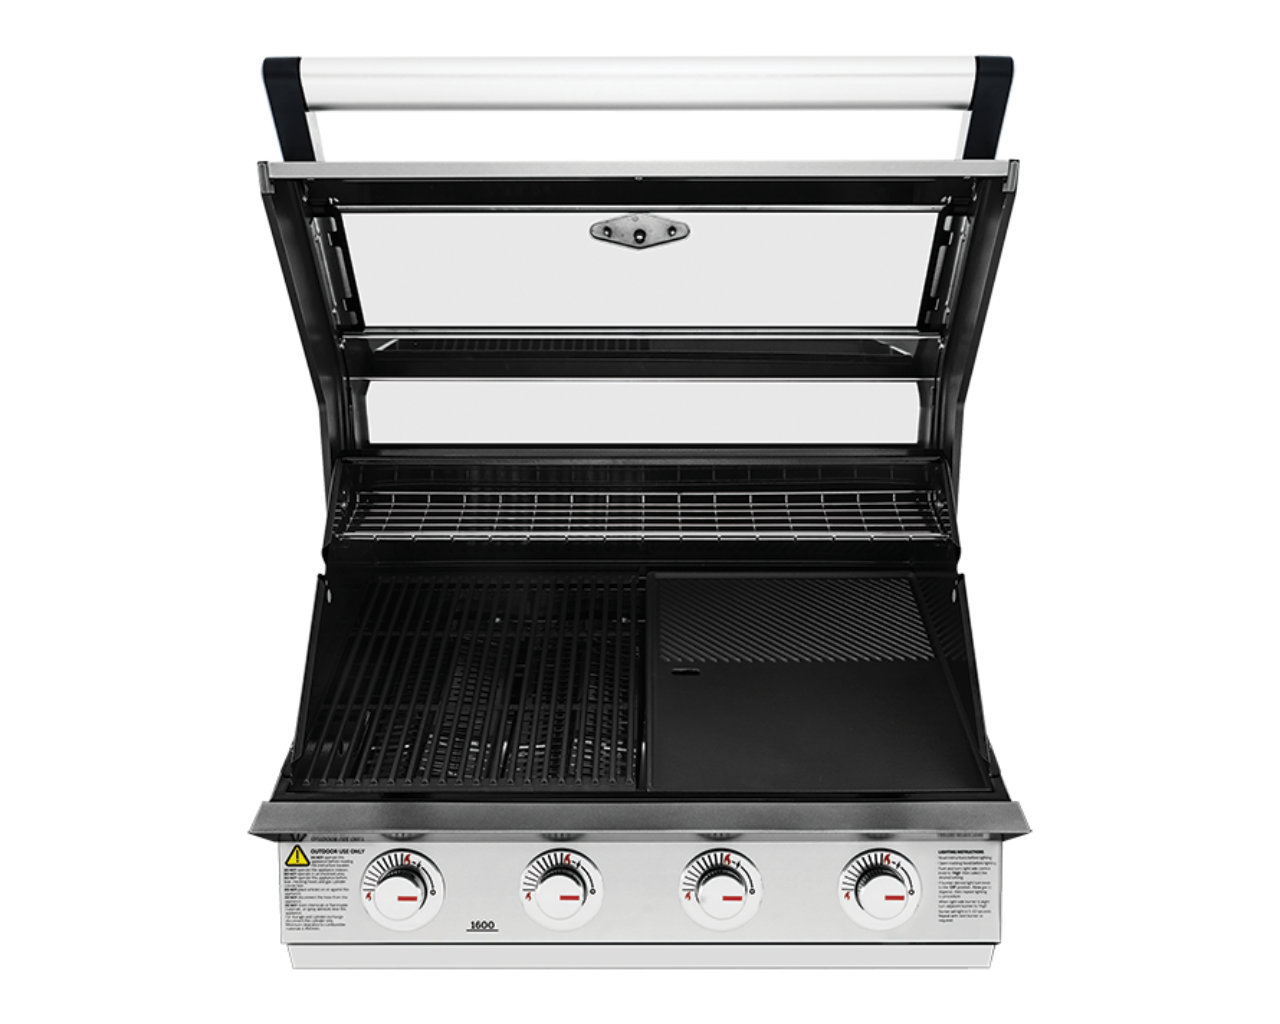 BeefEater 1600 Series 4 Burner Stainless Steel Build In BBQ, , hi-res image number null